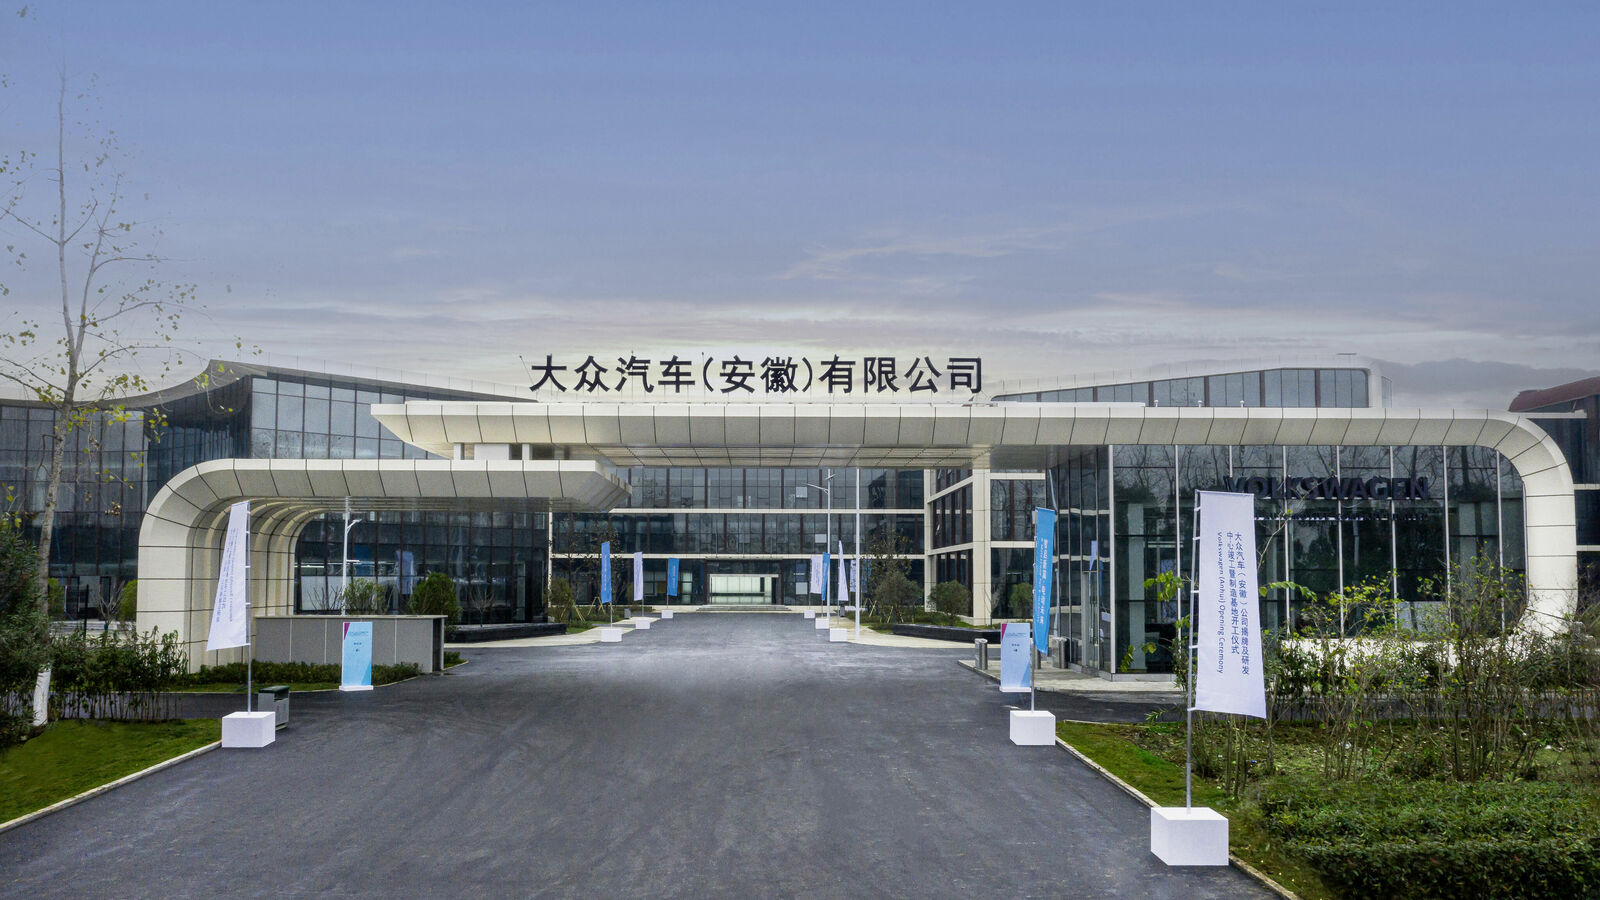 New research and development center in Anhui Province